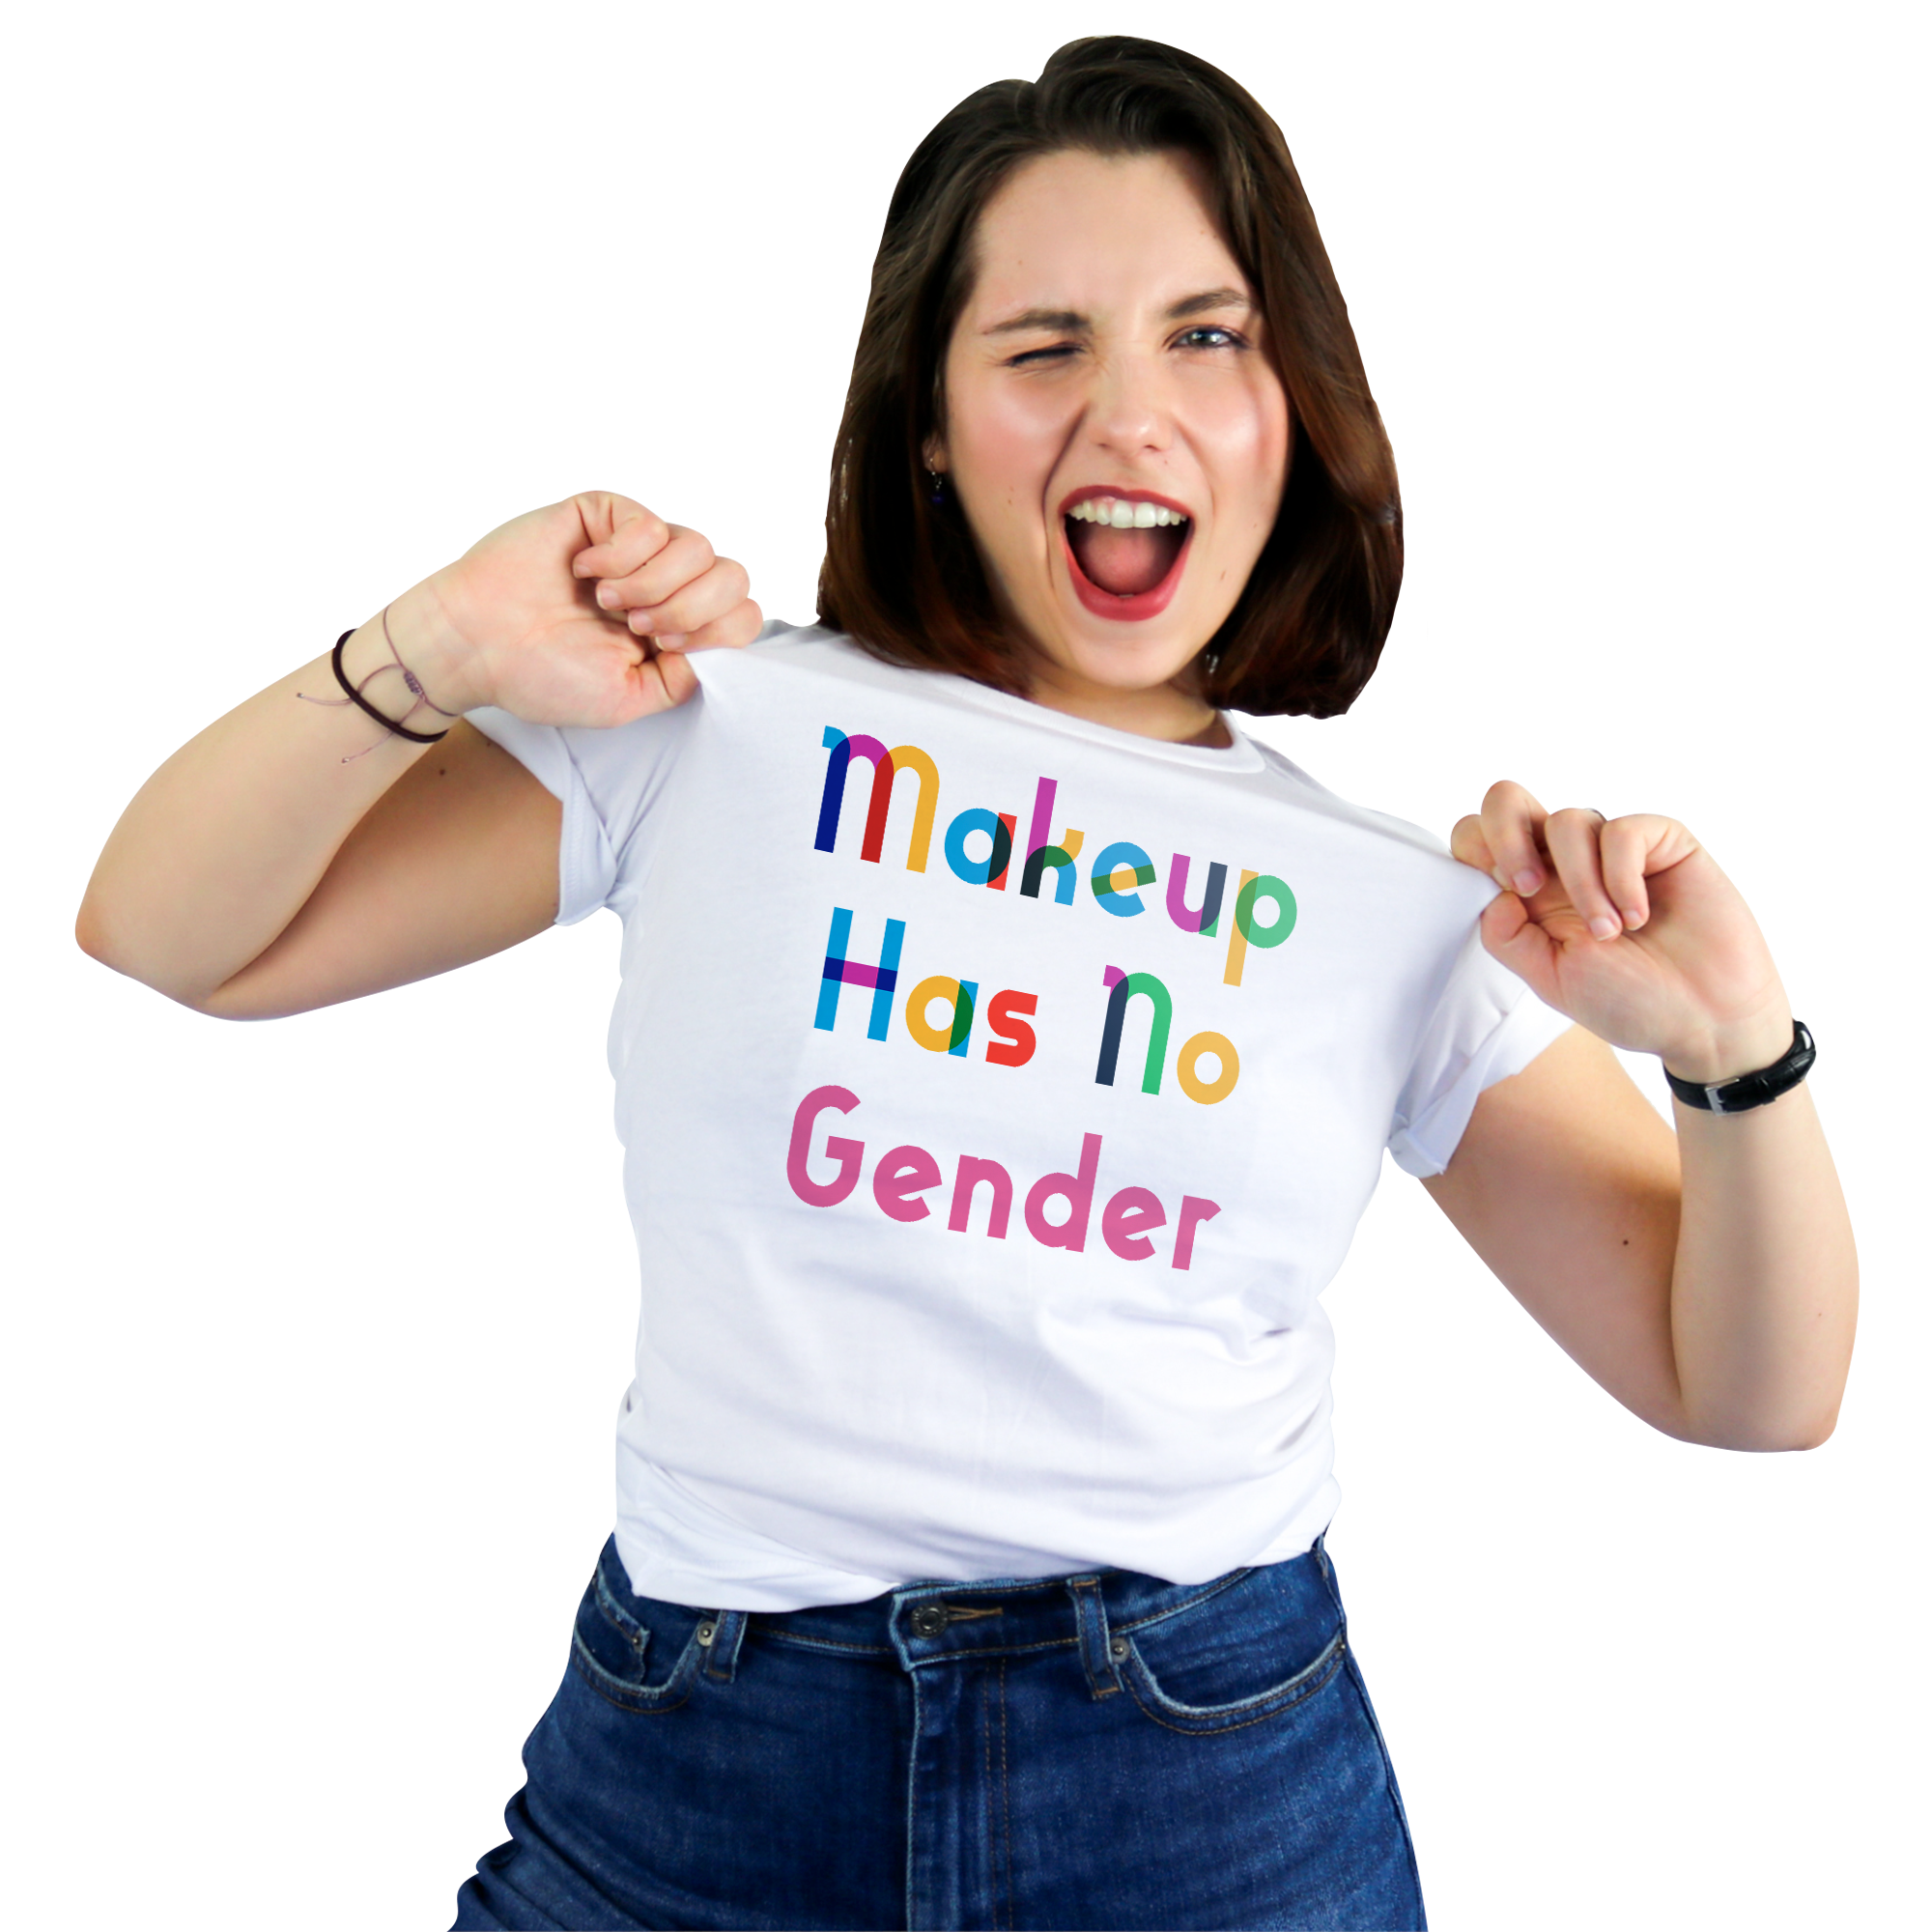 Make-up has no gender t-shirt PinkNews Pride for All